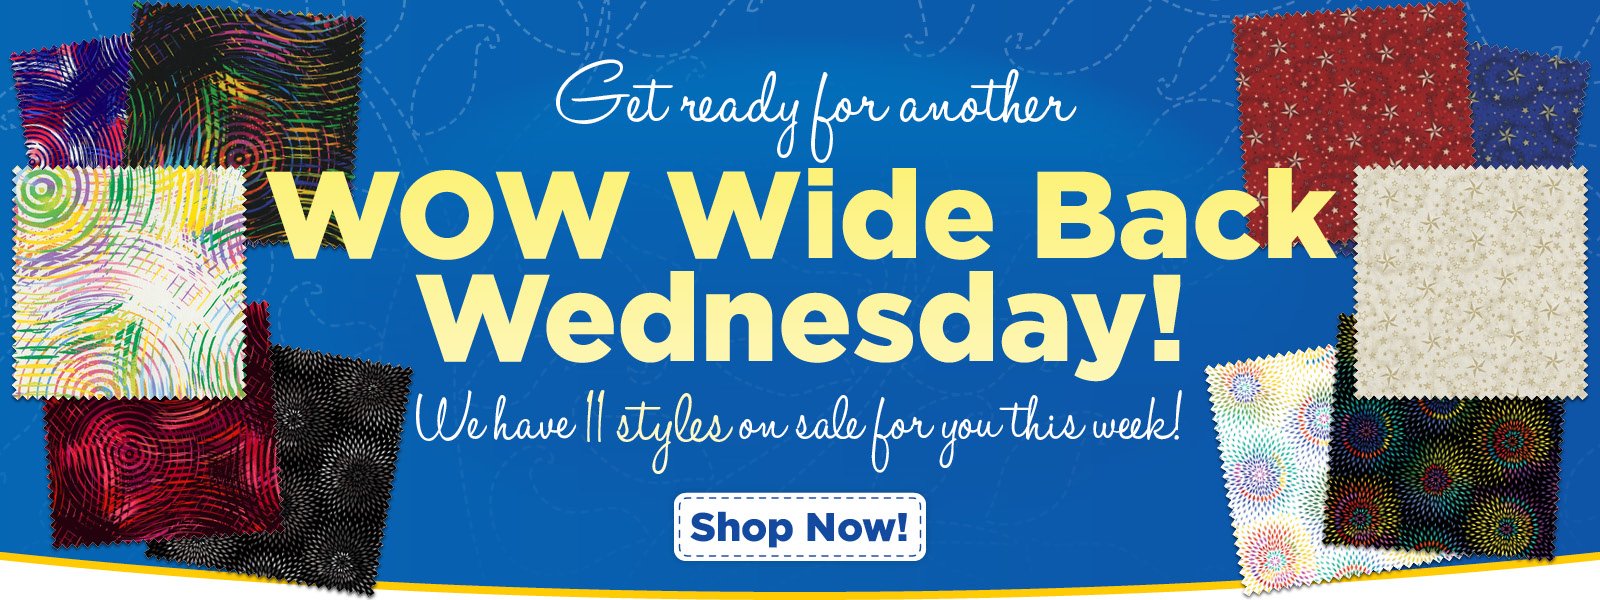 Get ready for another WOW Wide Back Wednesday! We have 11 styles on sale  for you this week!